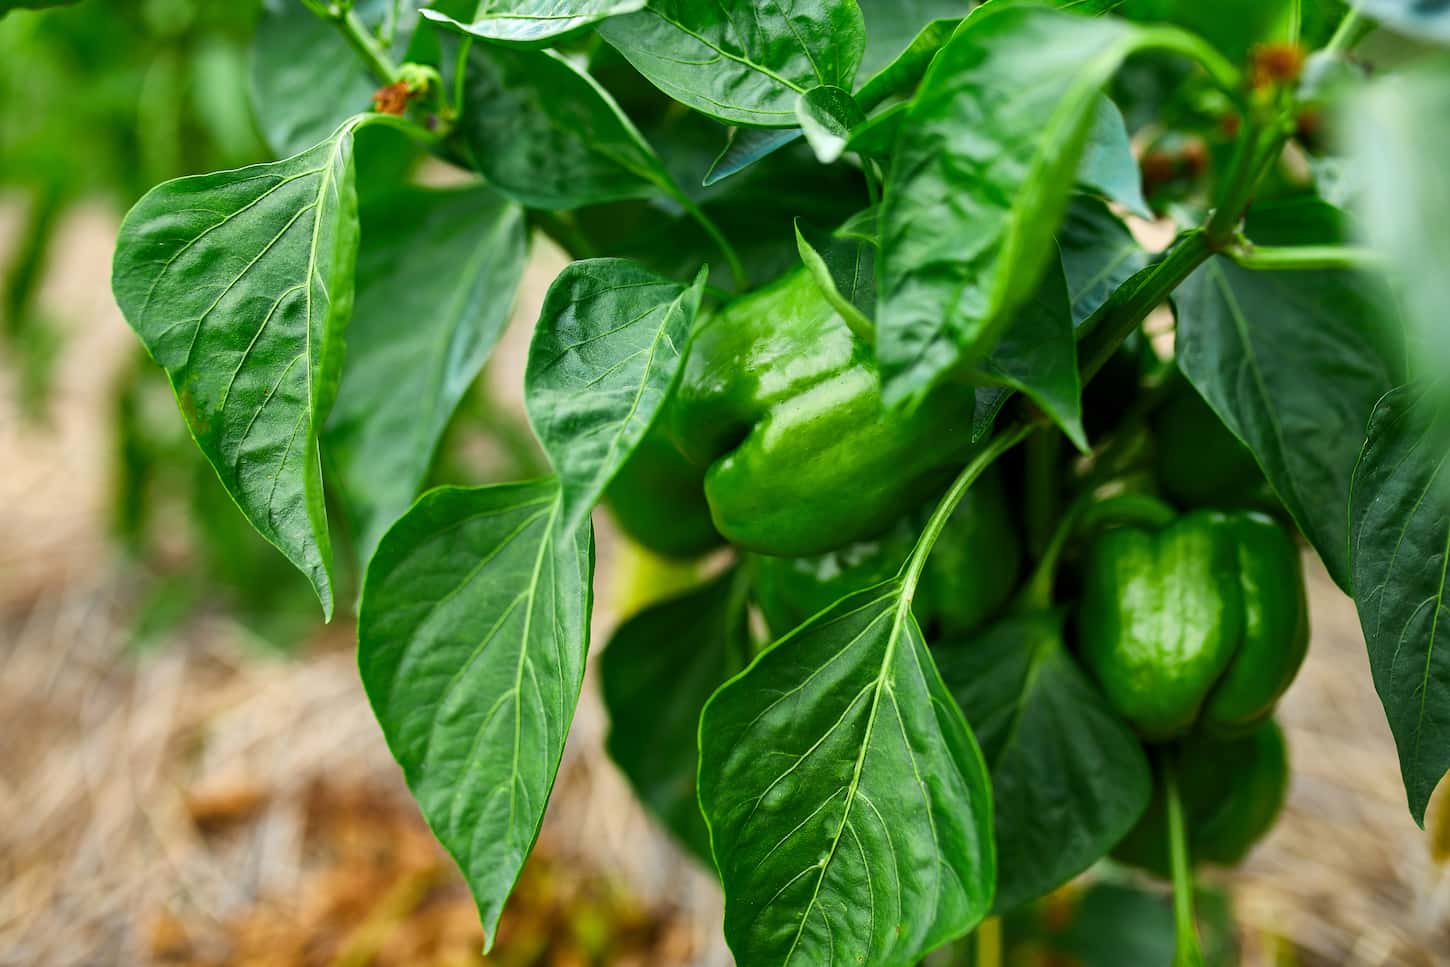 An image of green bell peppers growing in a garden outdoor set-up.